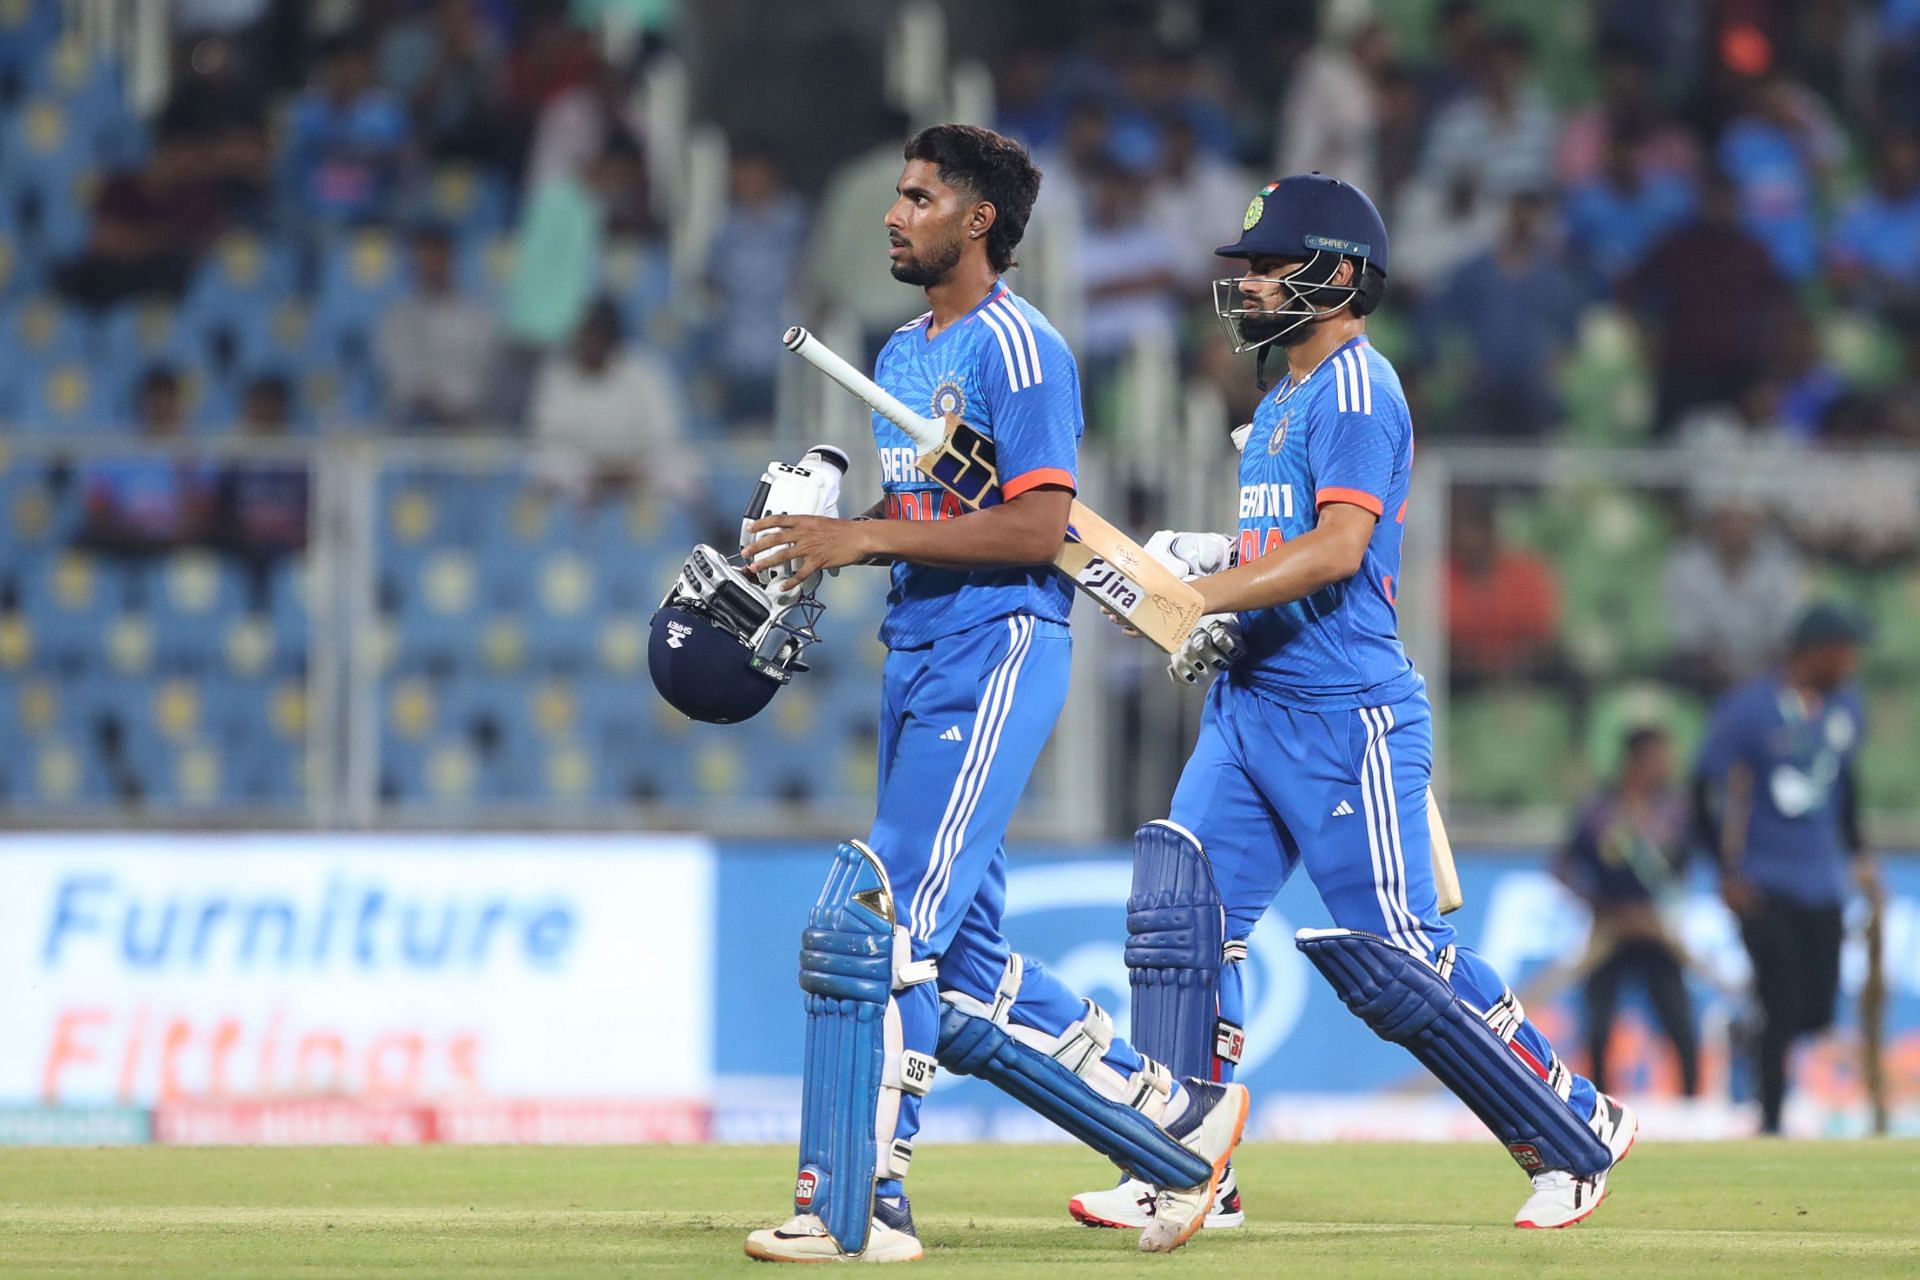 Tilak Varma and Rinku Singh will potentially bat at No. 4 and No. 5 respectively. [P/C: Getty]